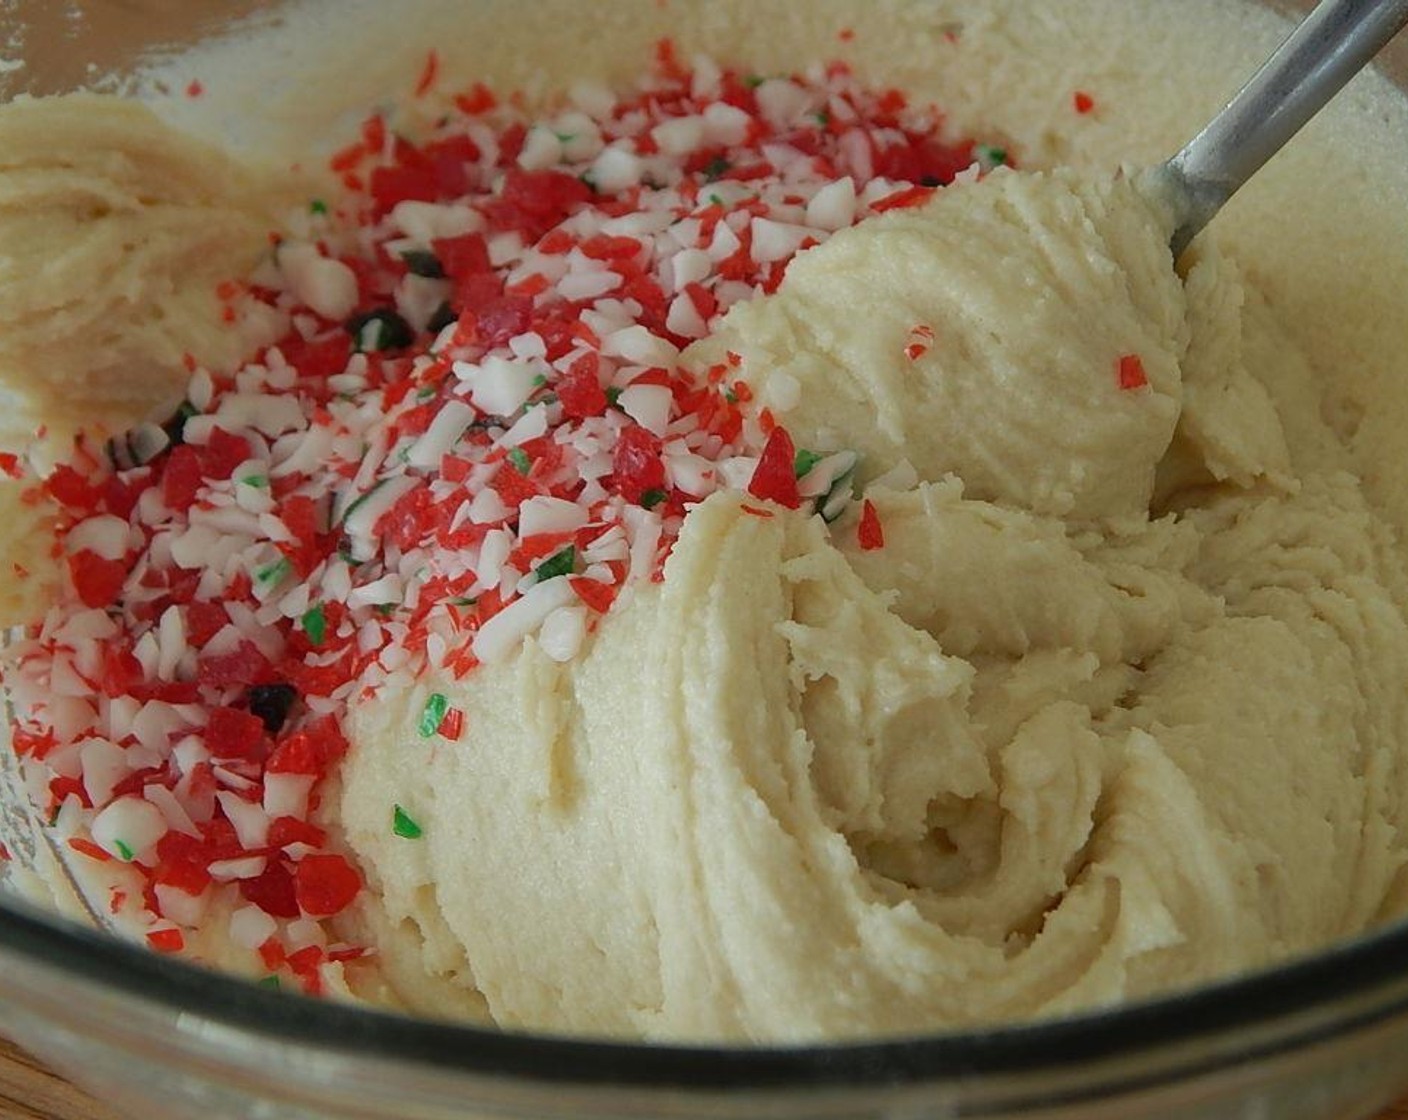 step 4 Mix in All-Purpose Flour (3/4 cup) and Baking Soda (1 tsp) with a spoon. Fold in Candy Canes (2 Tbsp) bits.